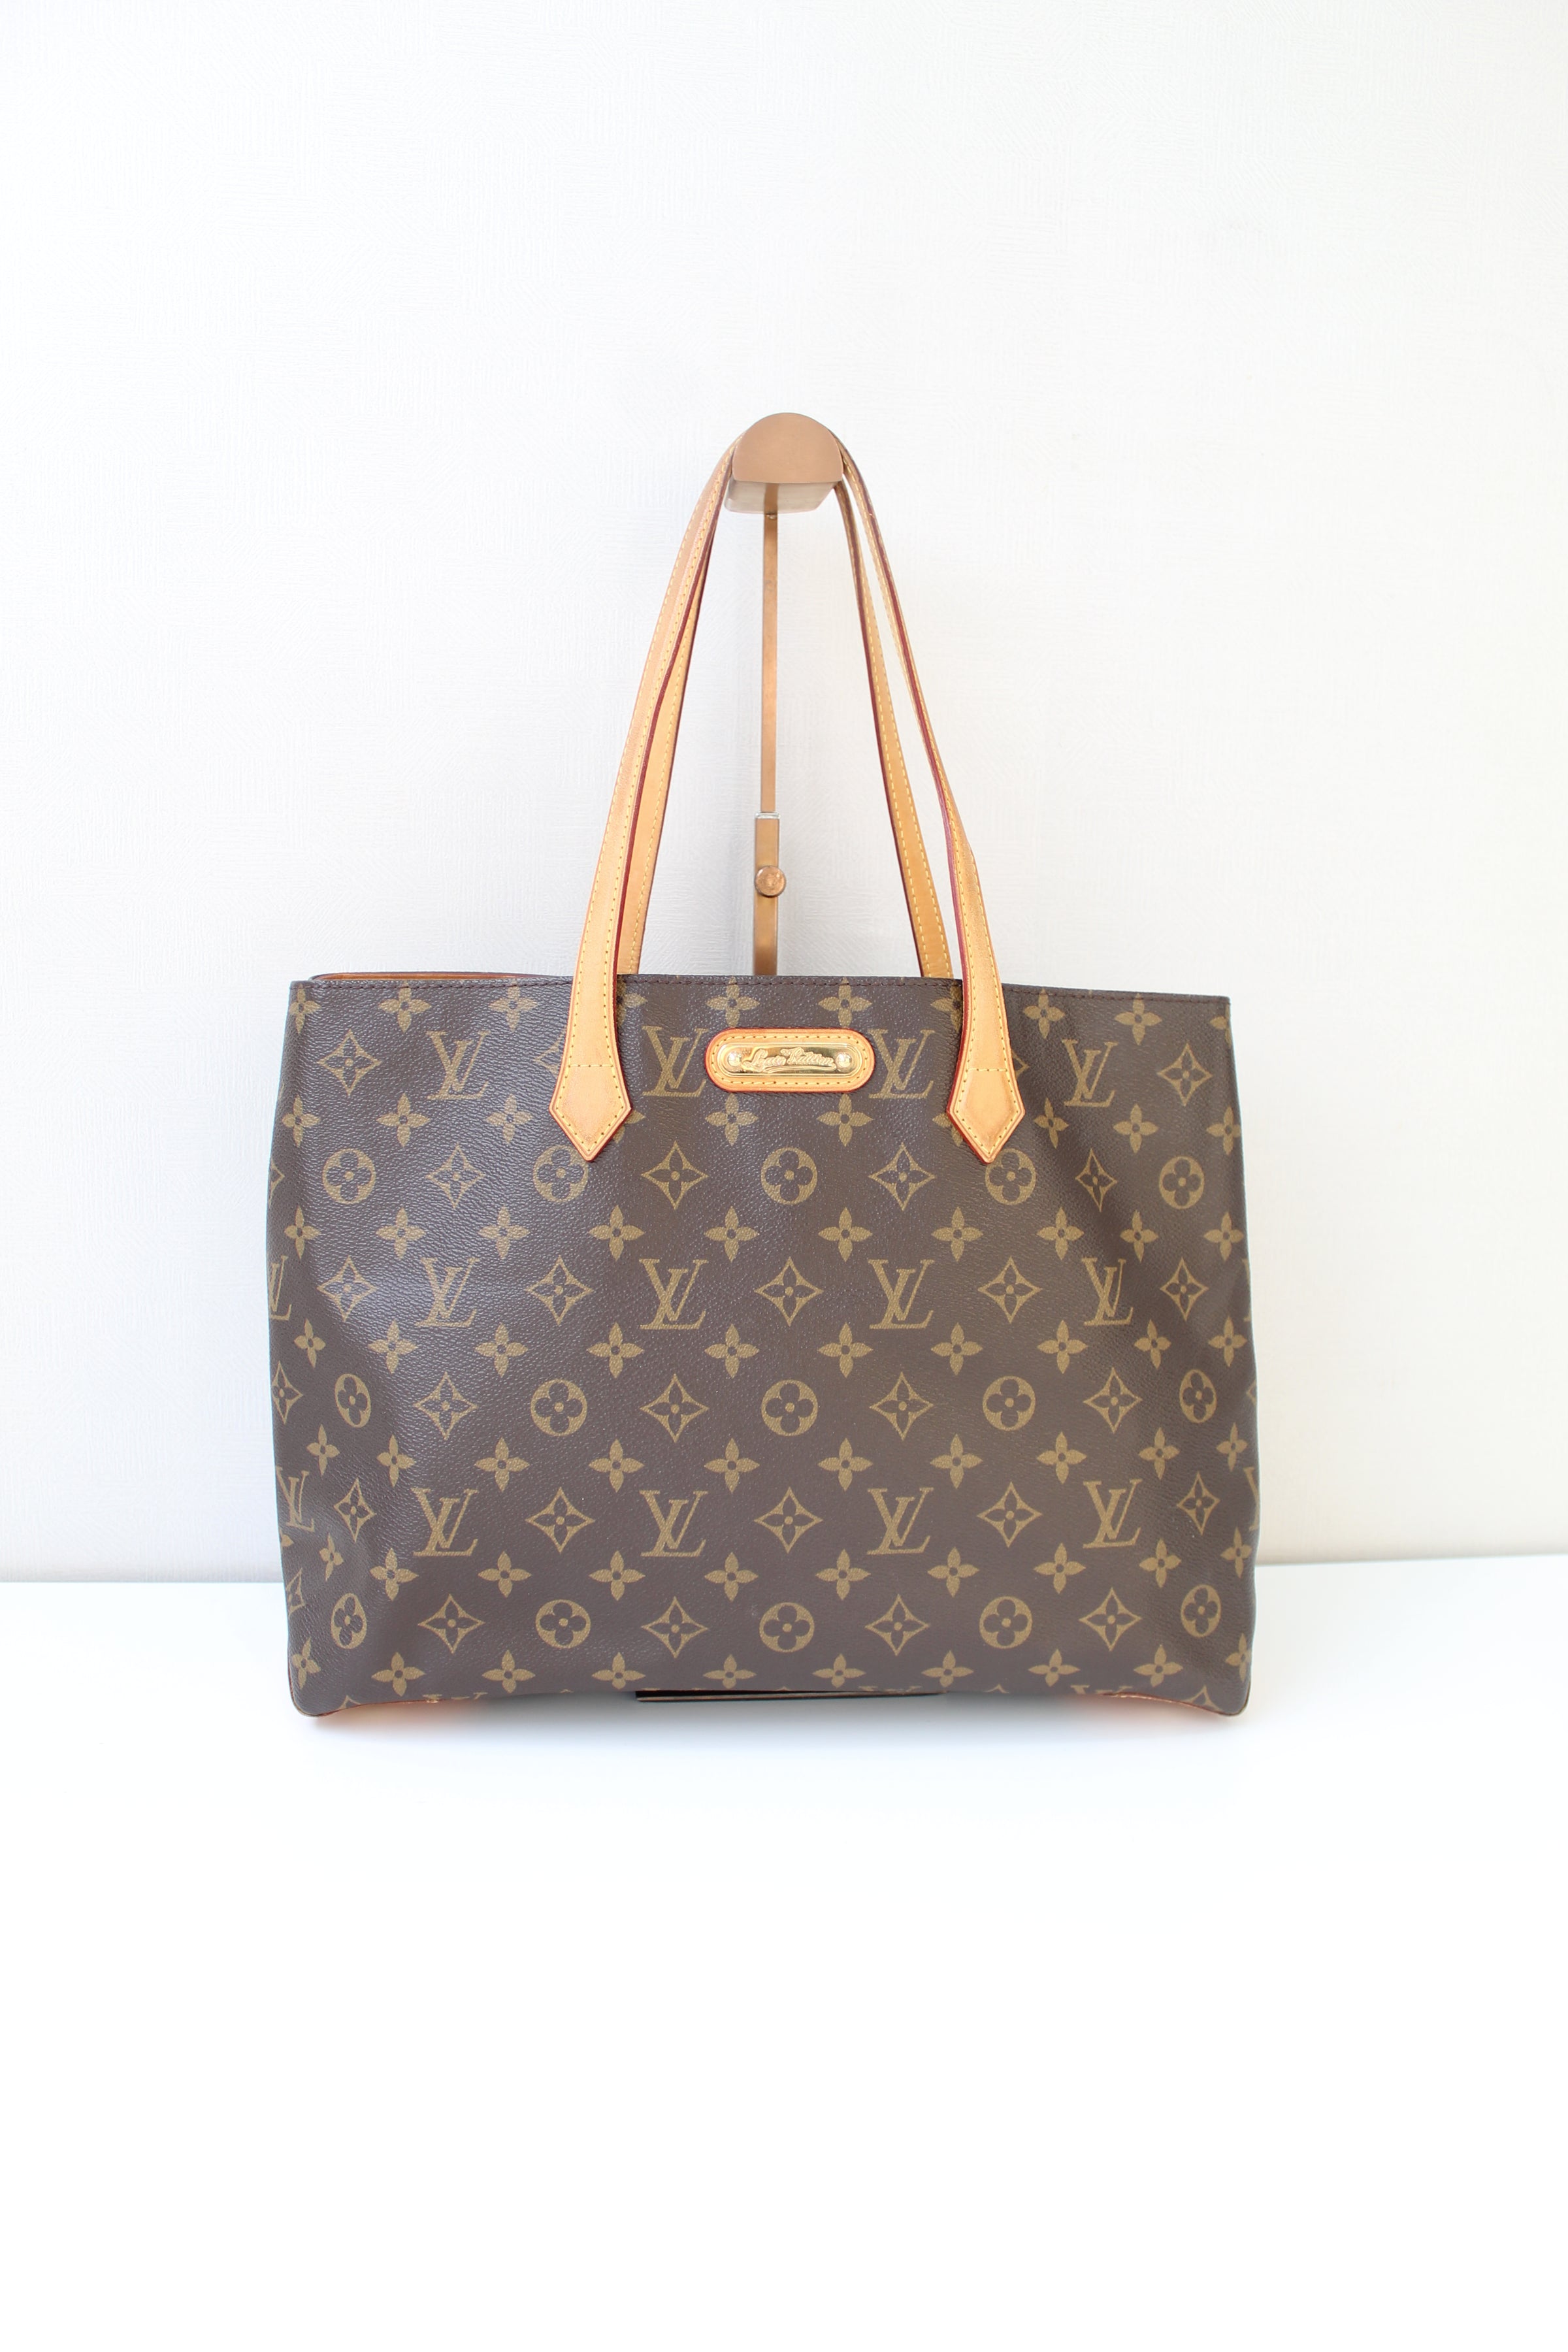 Pre-owned Louis Vuitton 2010 Wilshire Gm Tote Bag In Brown